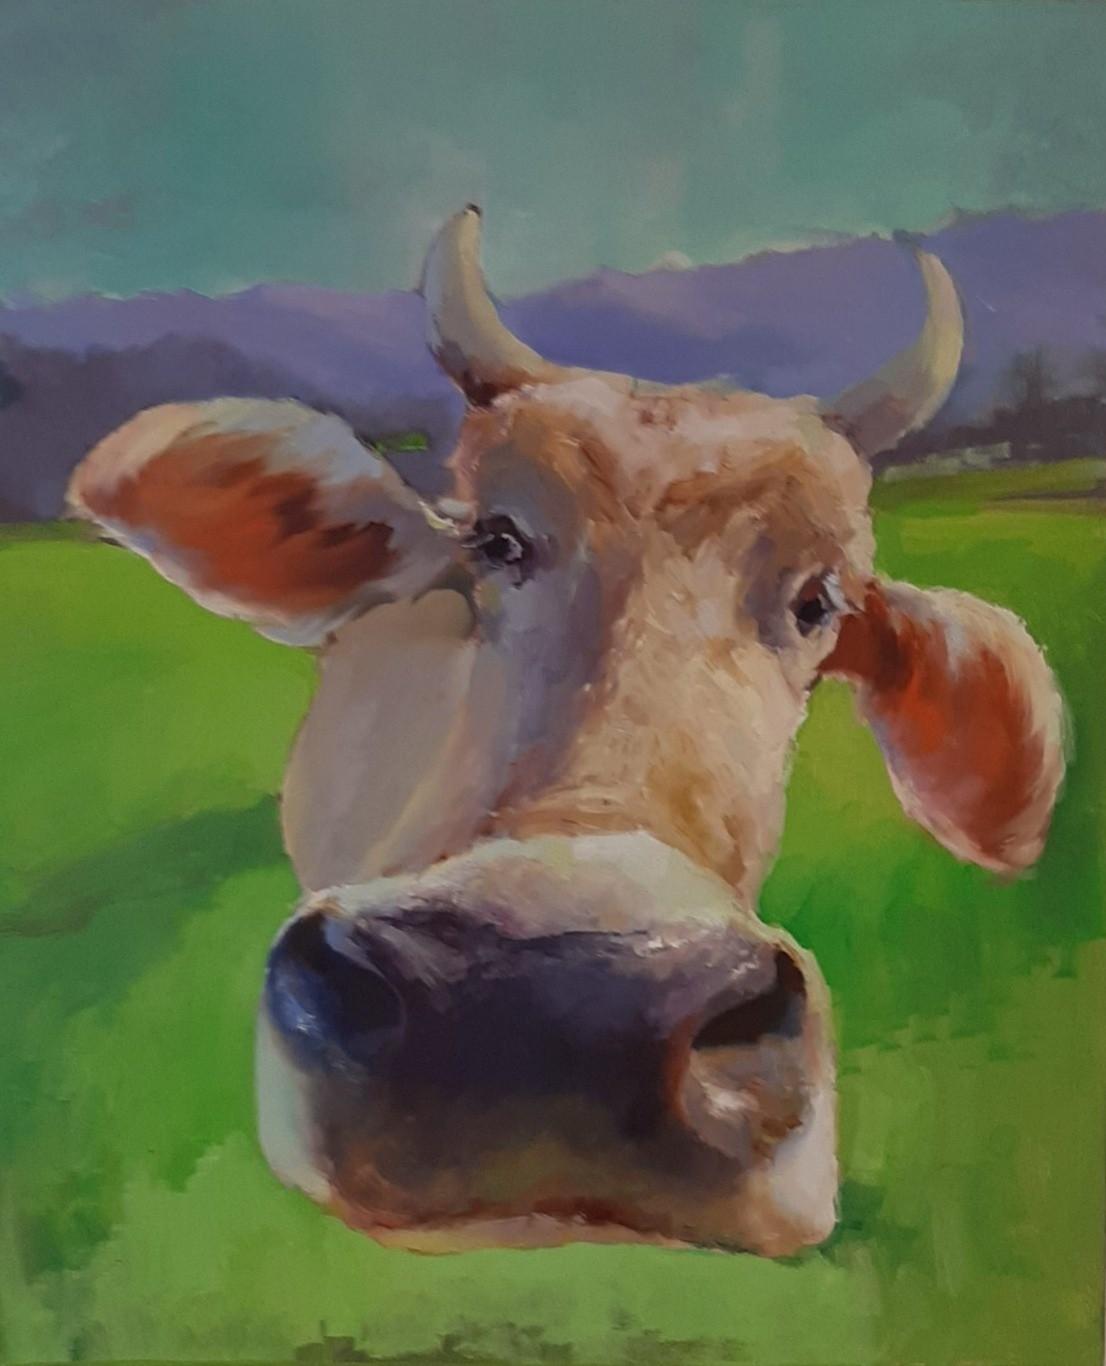 Max Skoblinsky Animal Print - Enchanting Cow Muzzle in Approach. Funny  .Print on Canvas with farm animal